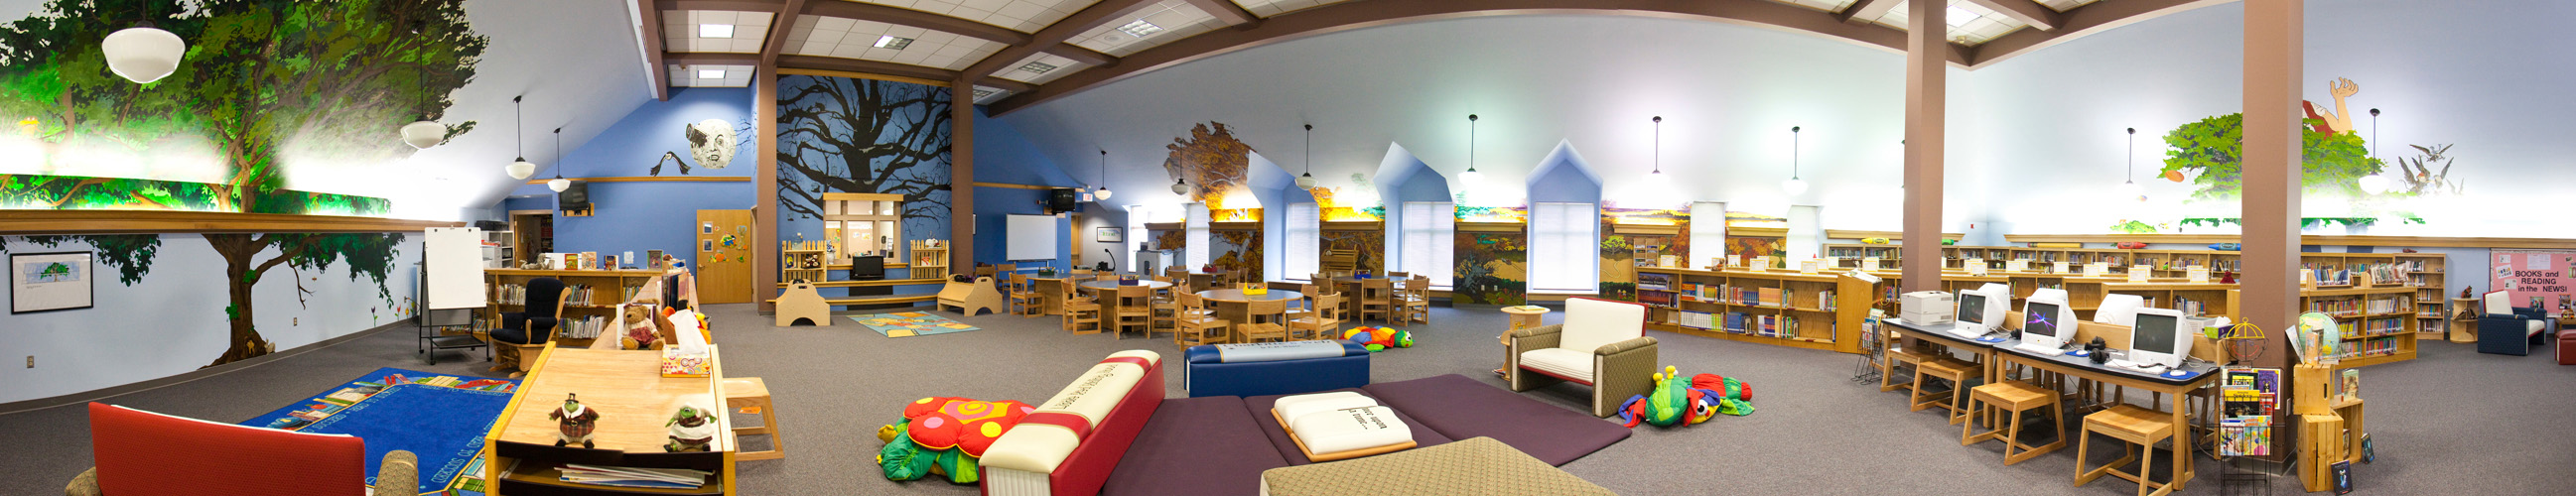 Dundee Elementary Library Panorama